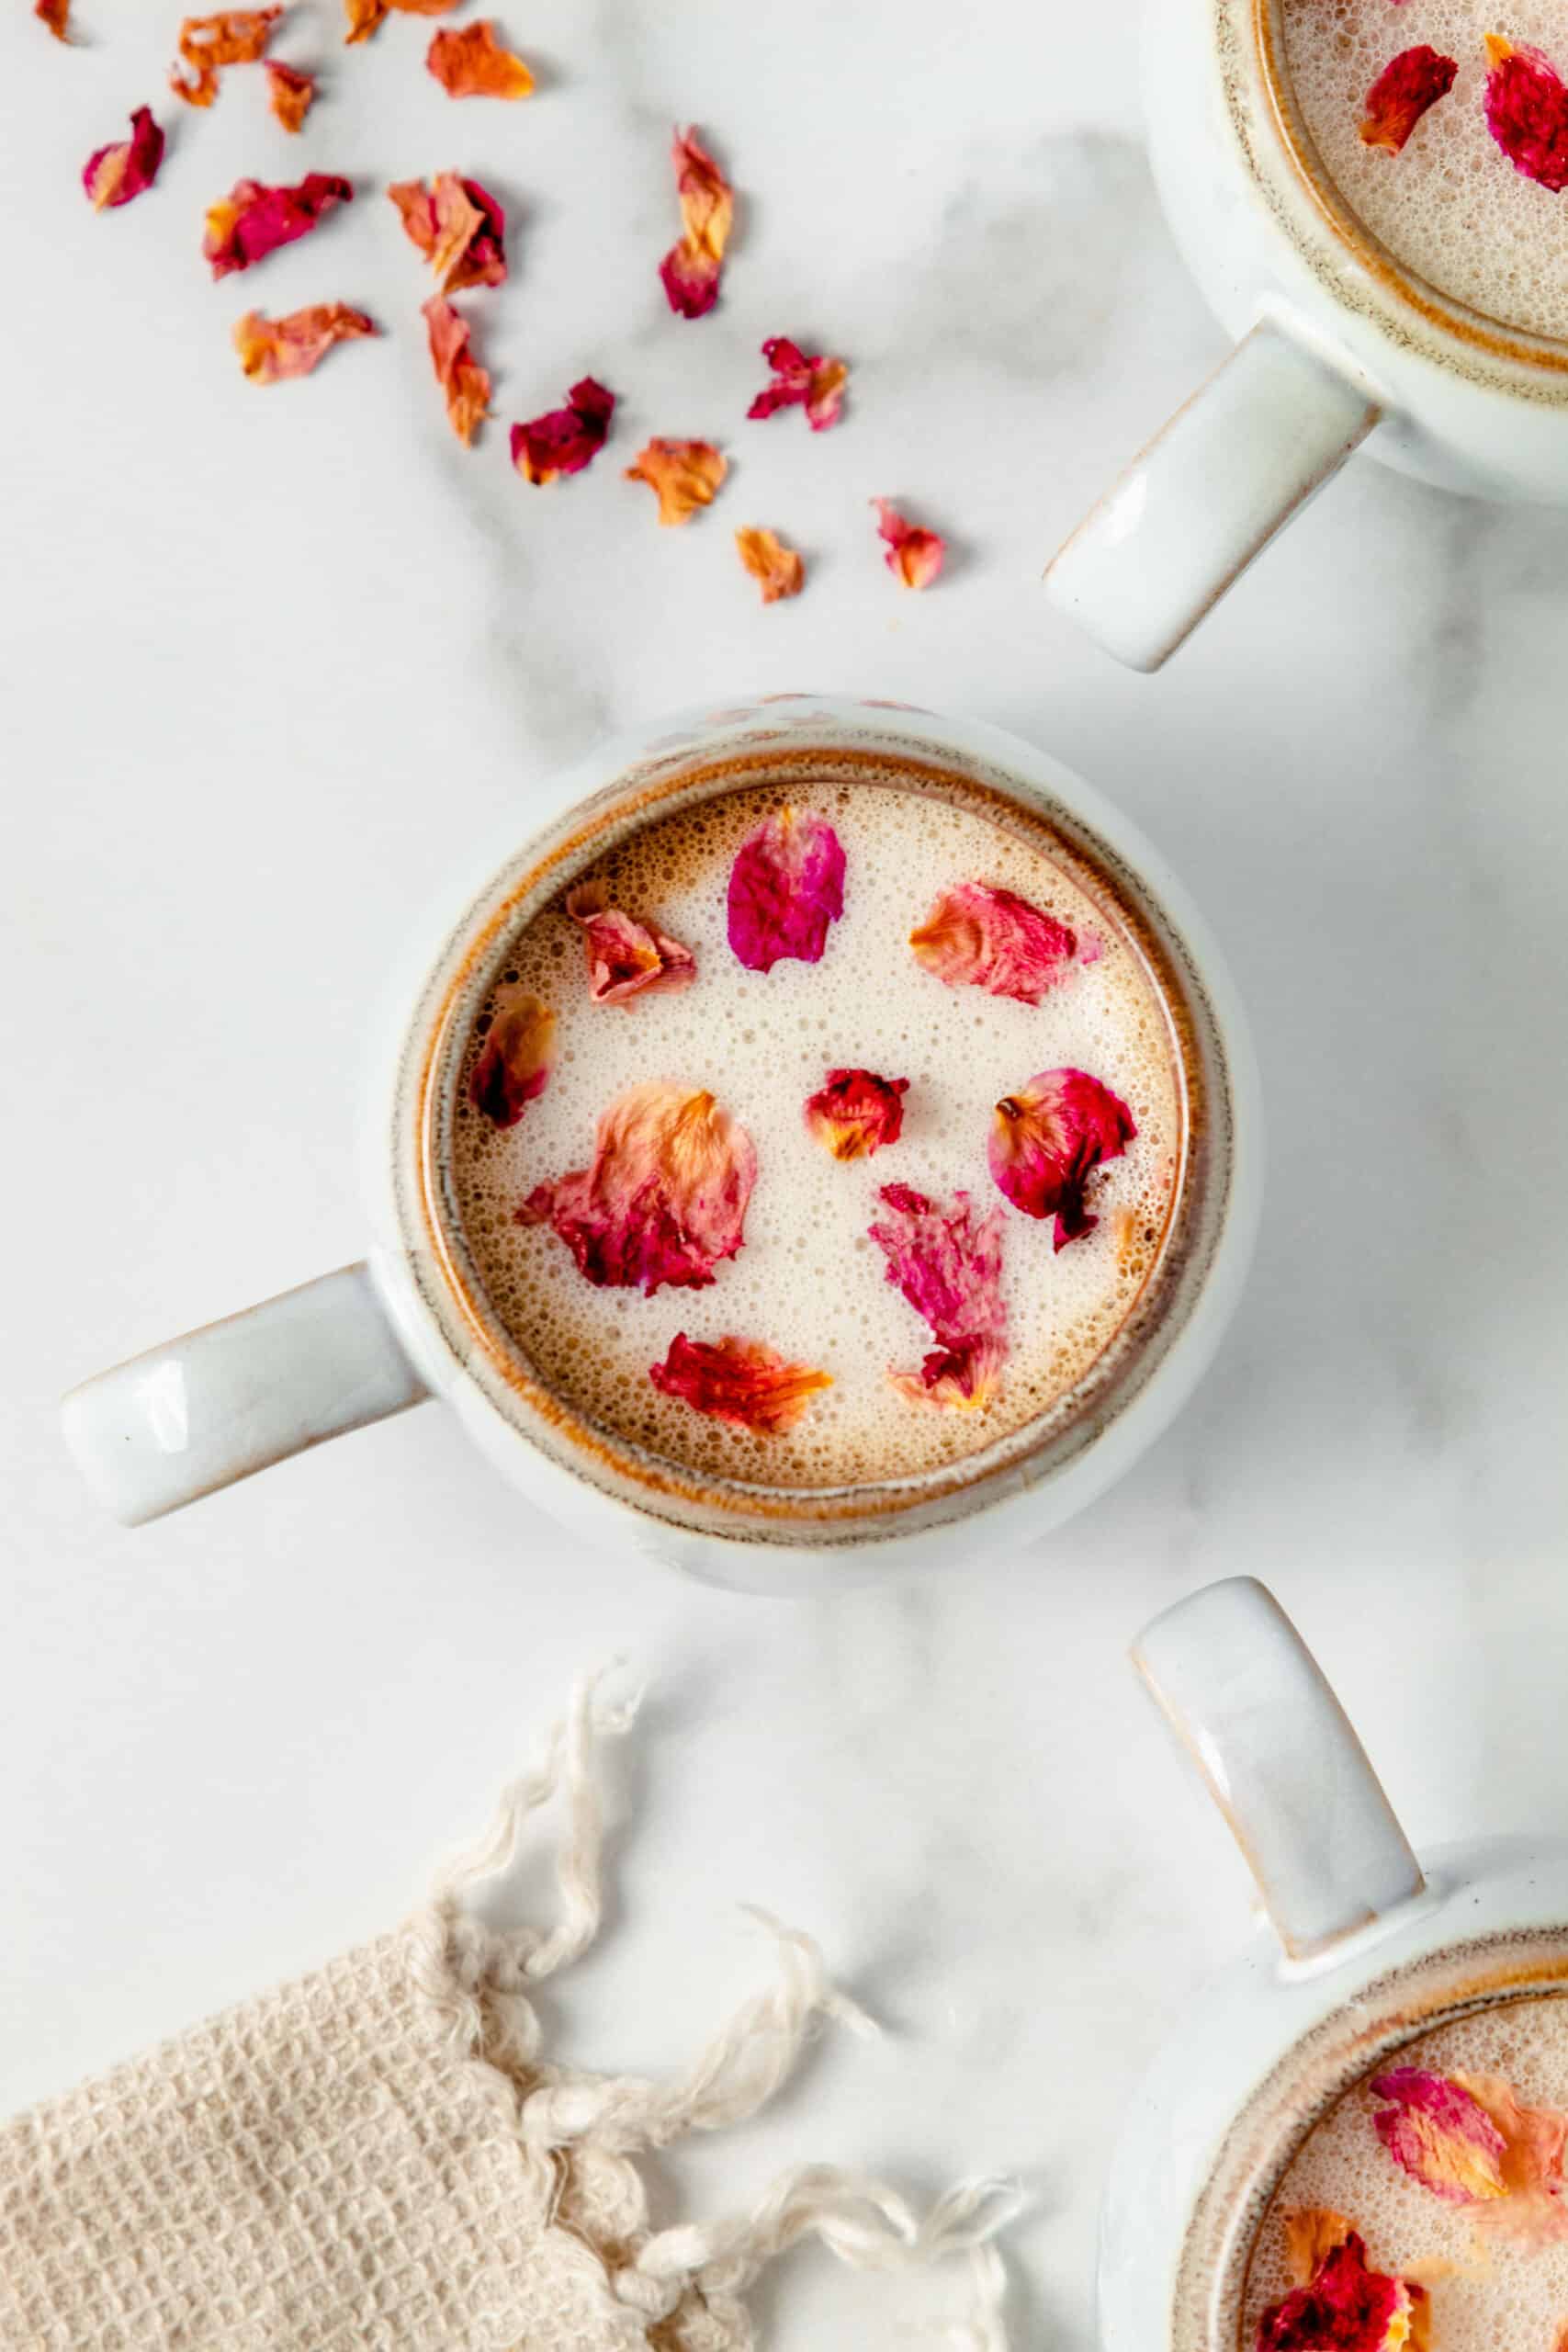 Rose latte with rose petals in a white coffee mug.